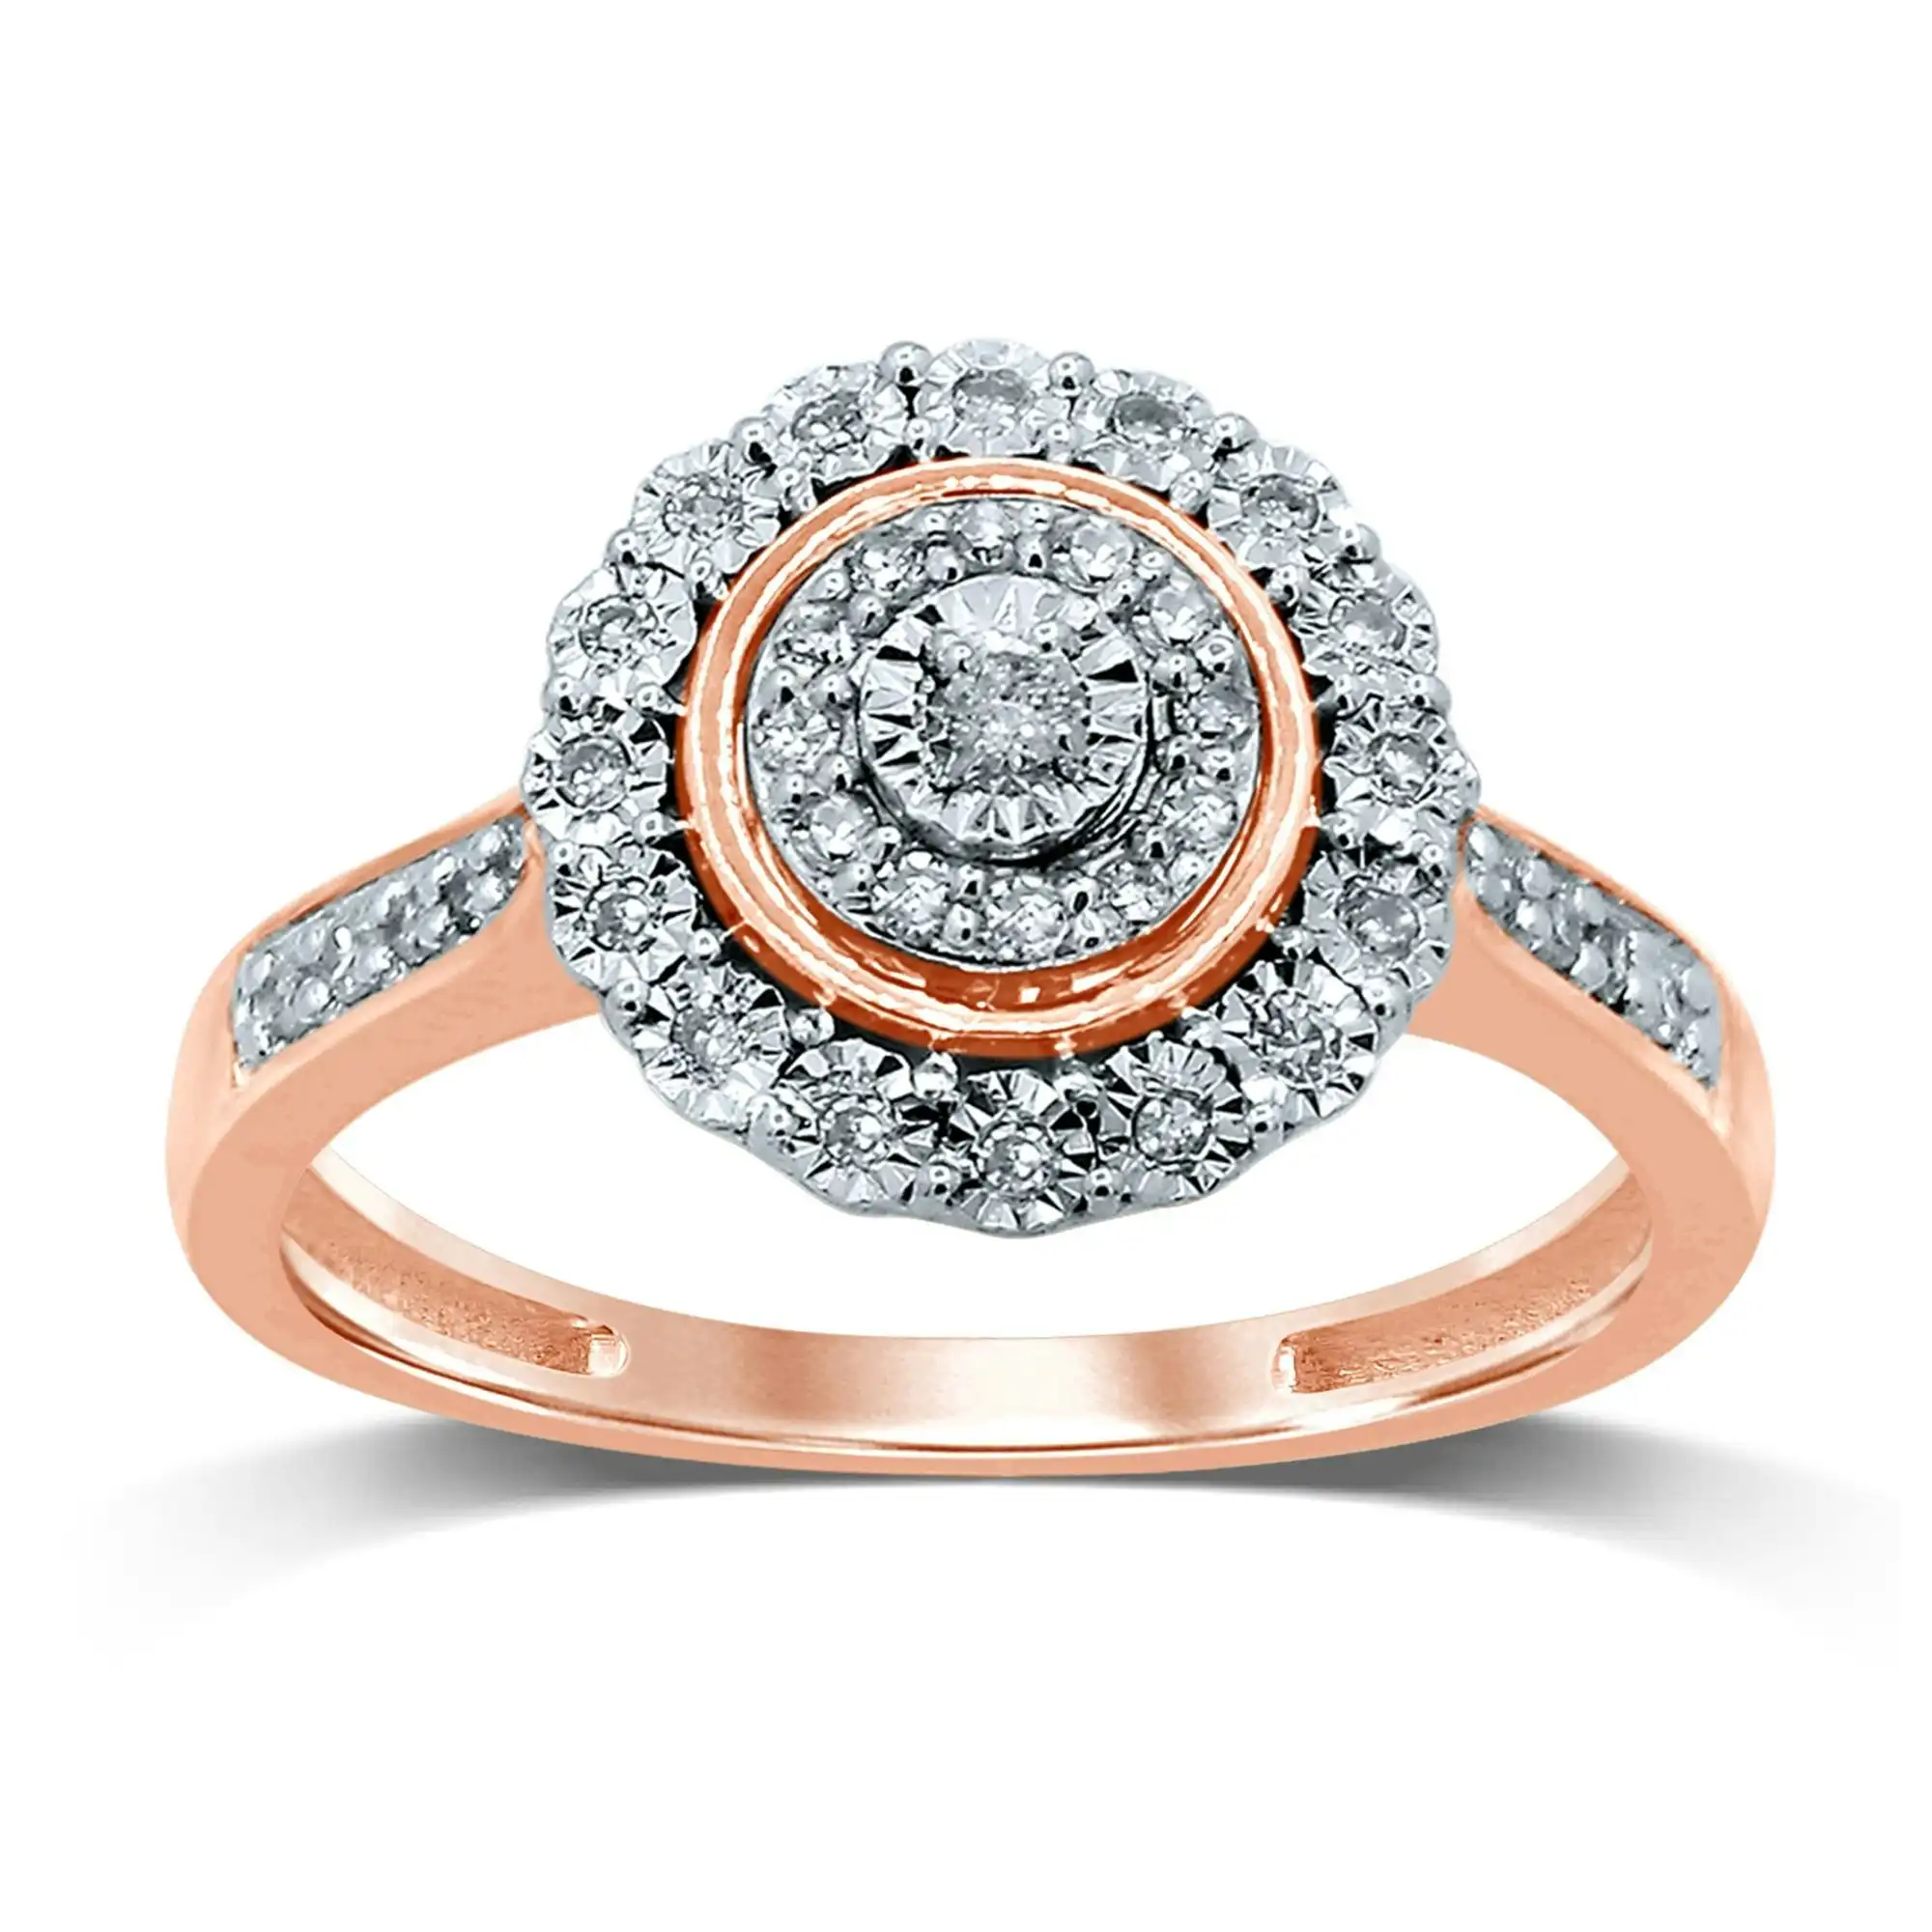 Miracle Halo Ring with 1/5ct of Diamonds in 9ct Rose Gold